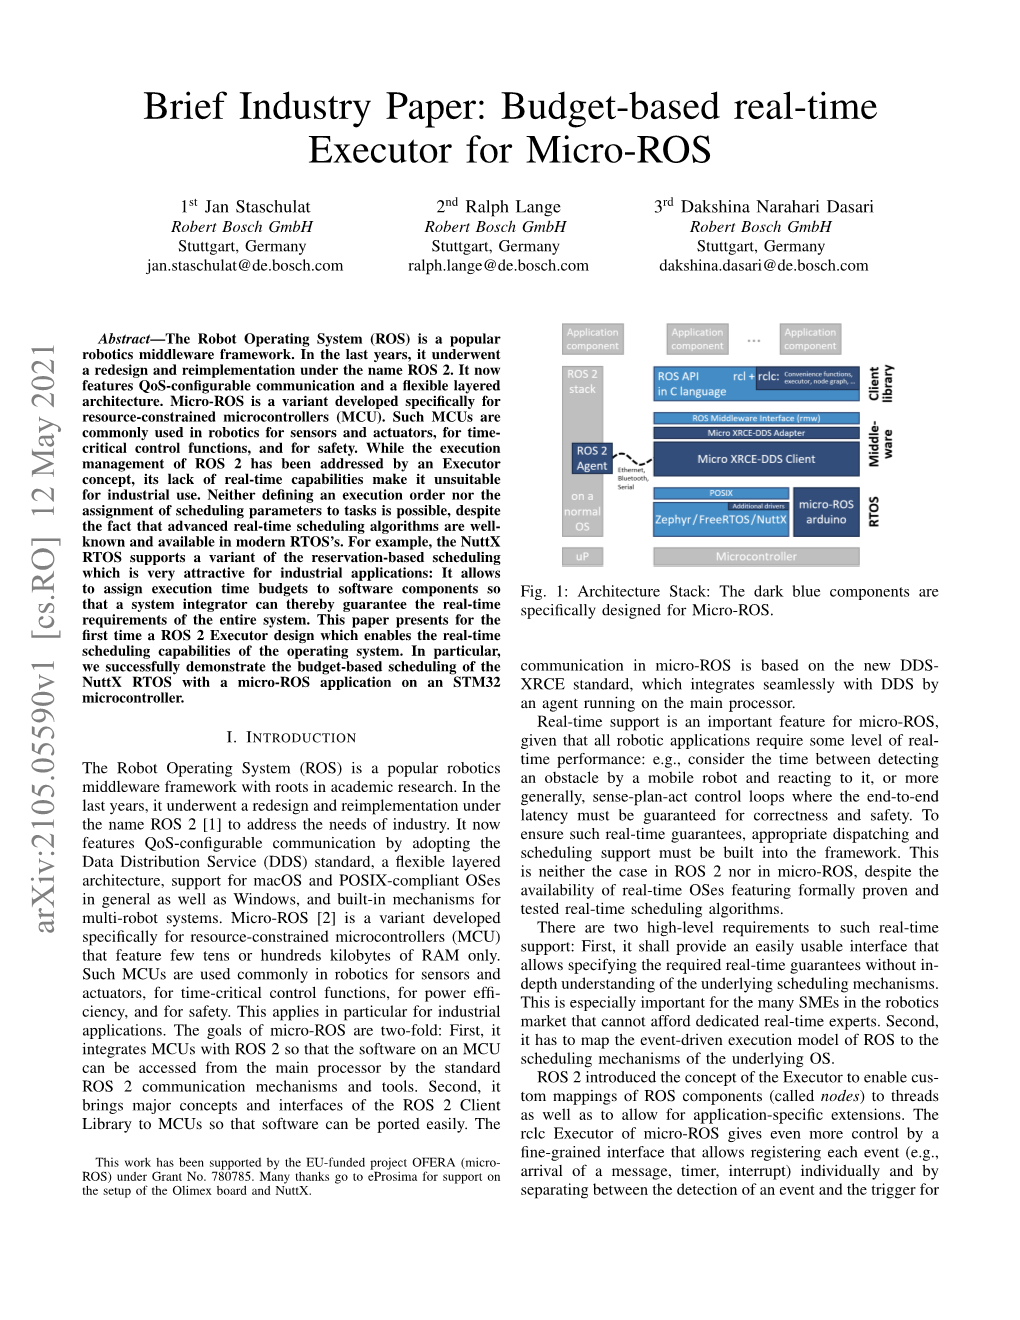 Brief Industry Paper: Budget-Based Real-Time Executor for Micro-ROS